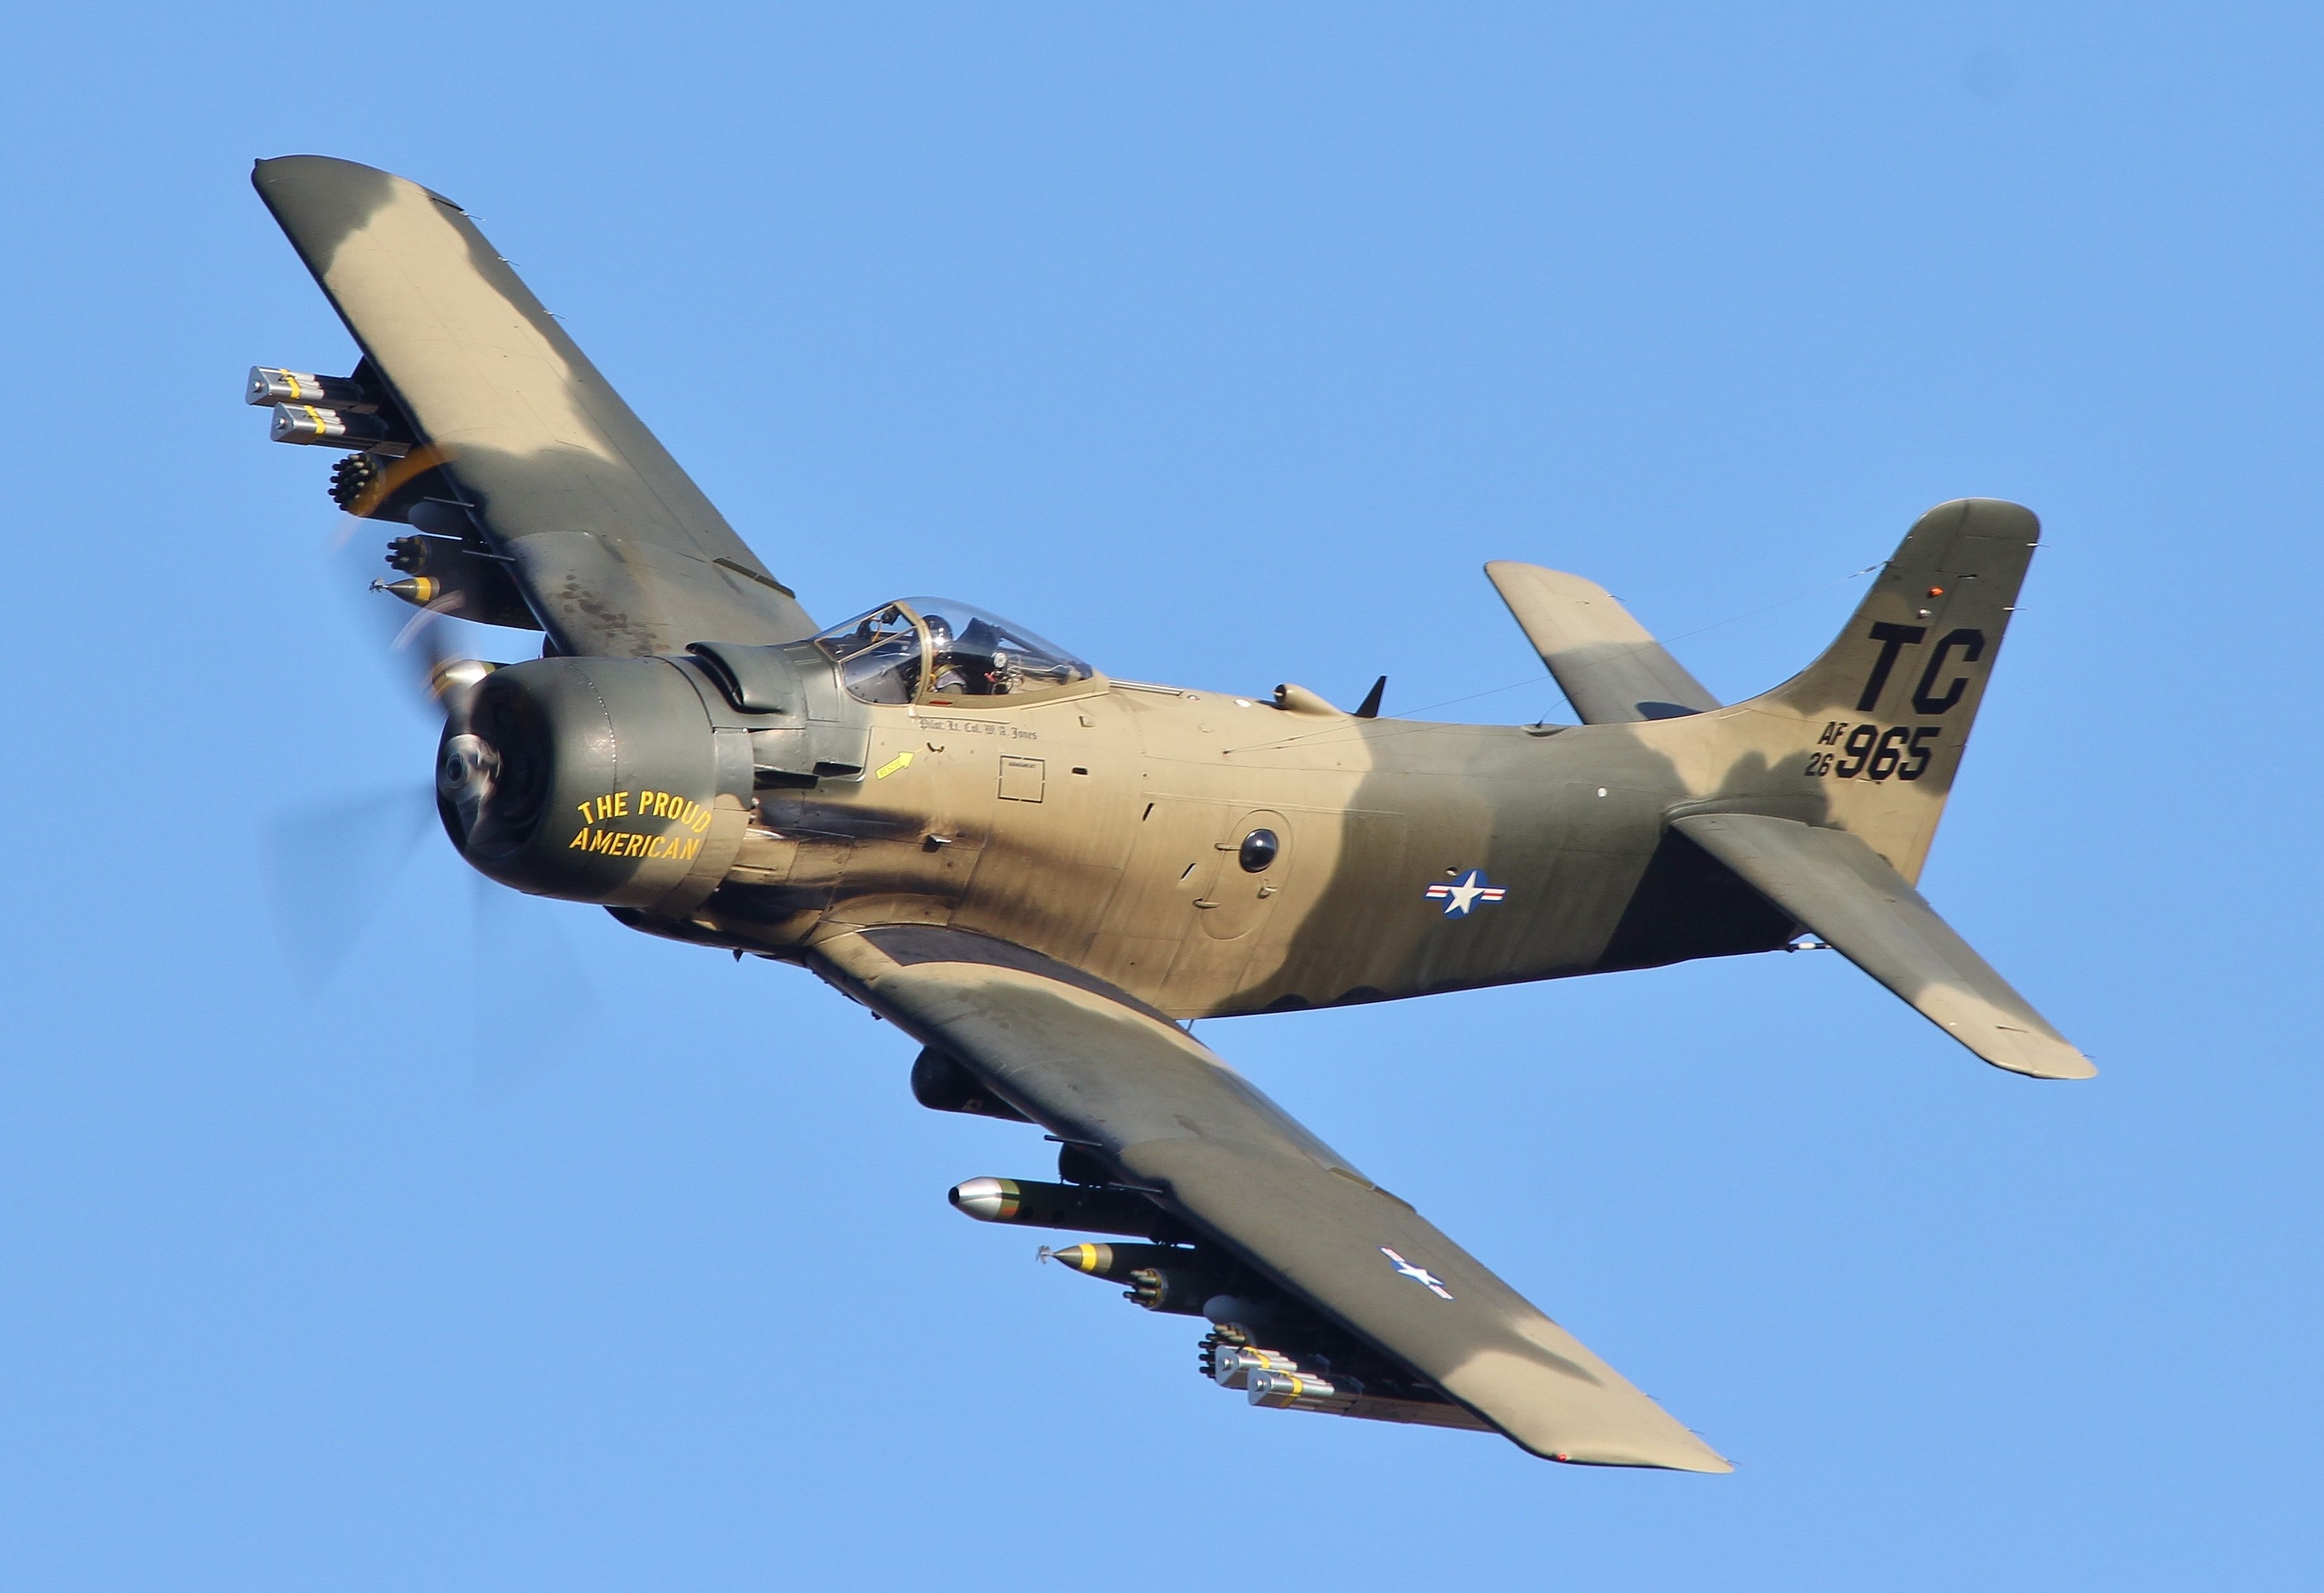 A Douglas A-1 Skyraider flying in the sky.